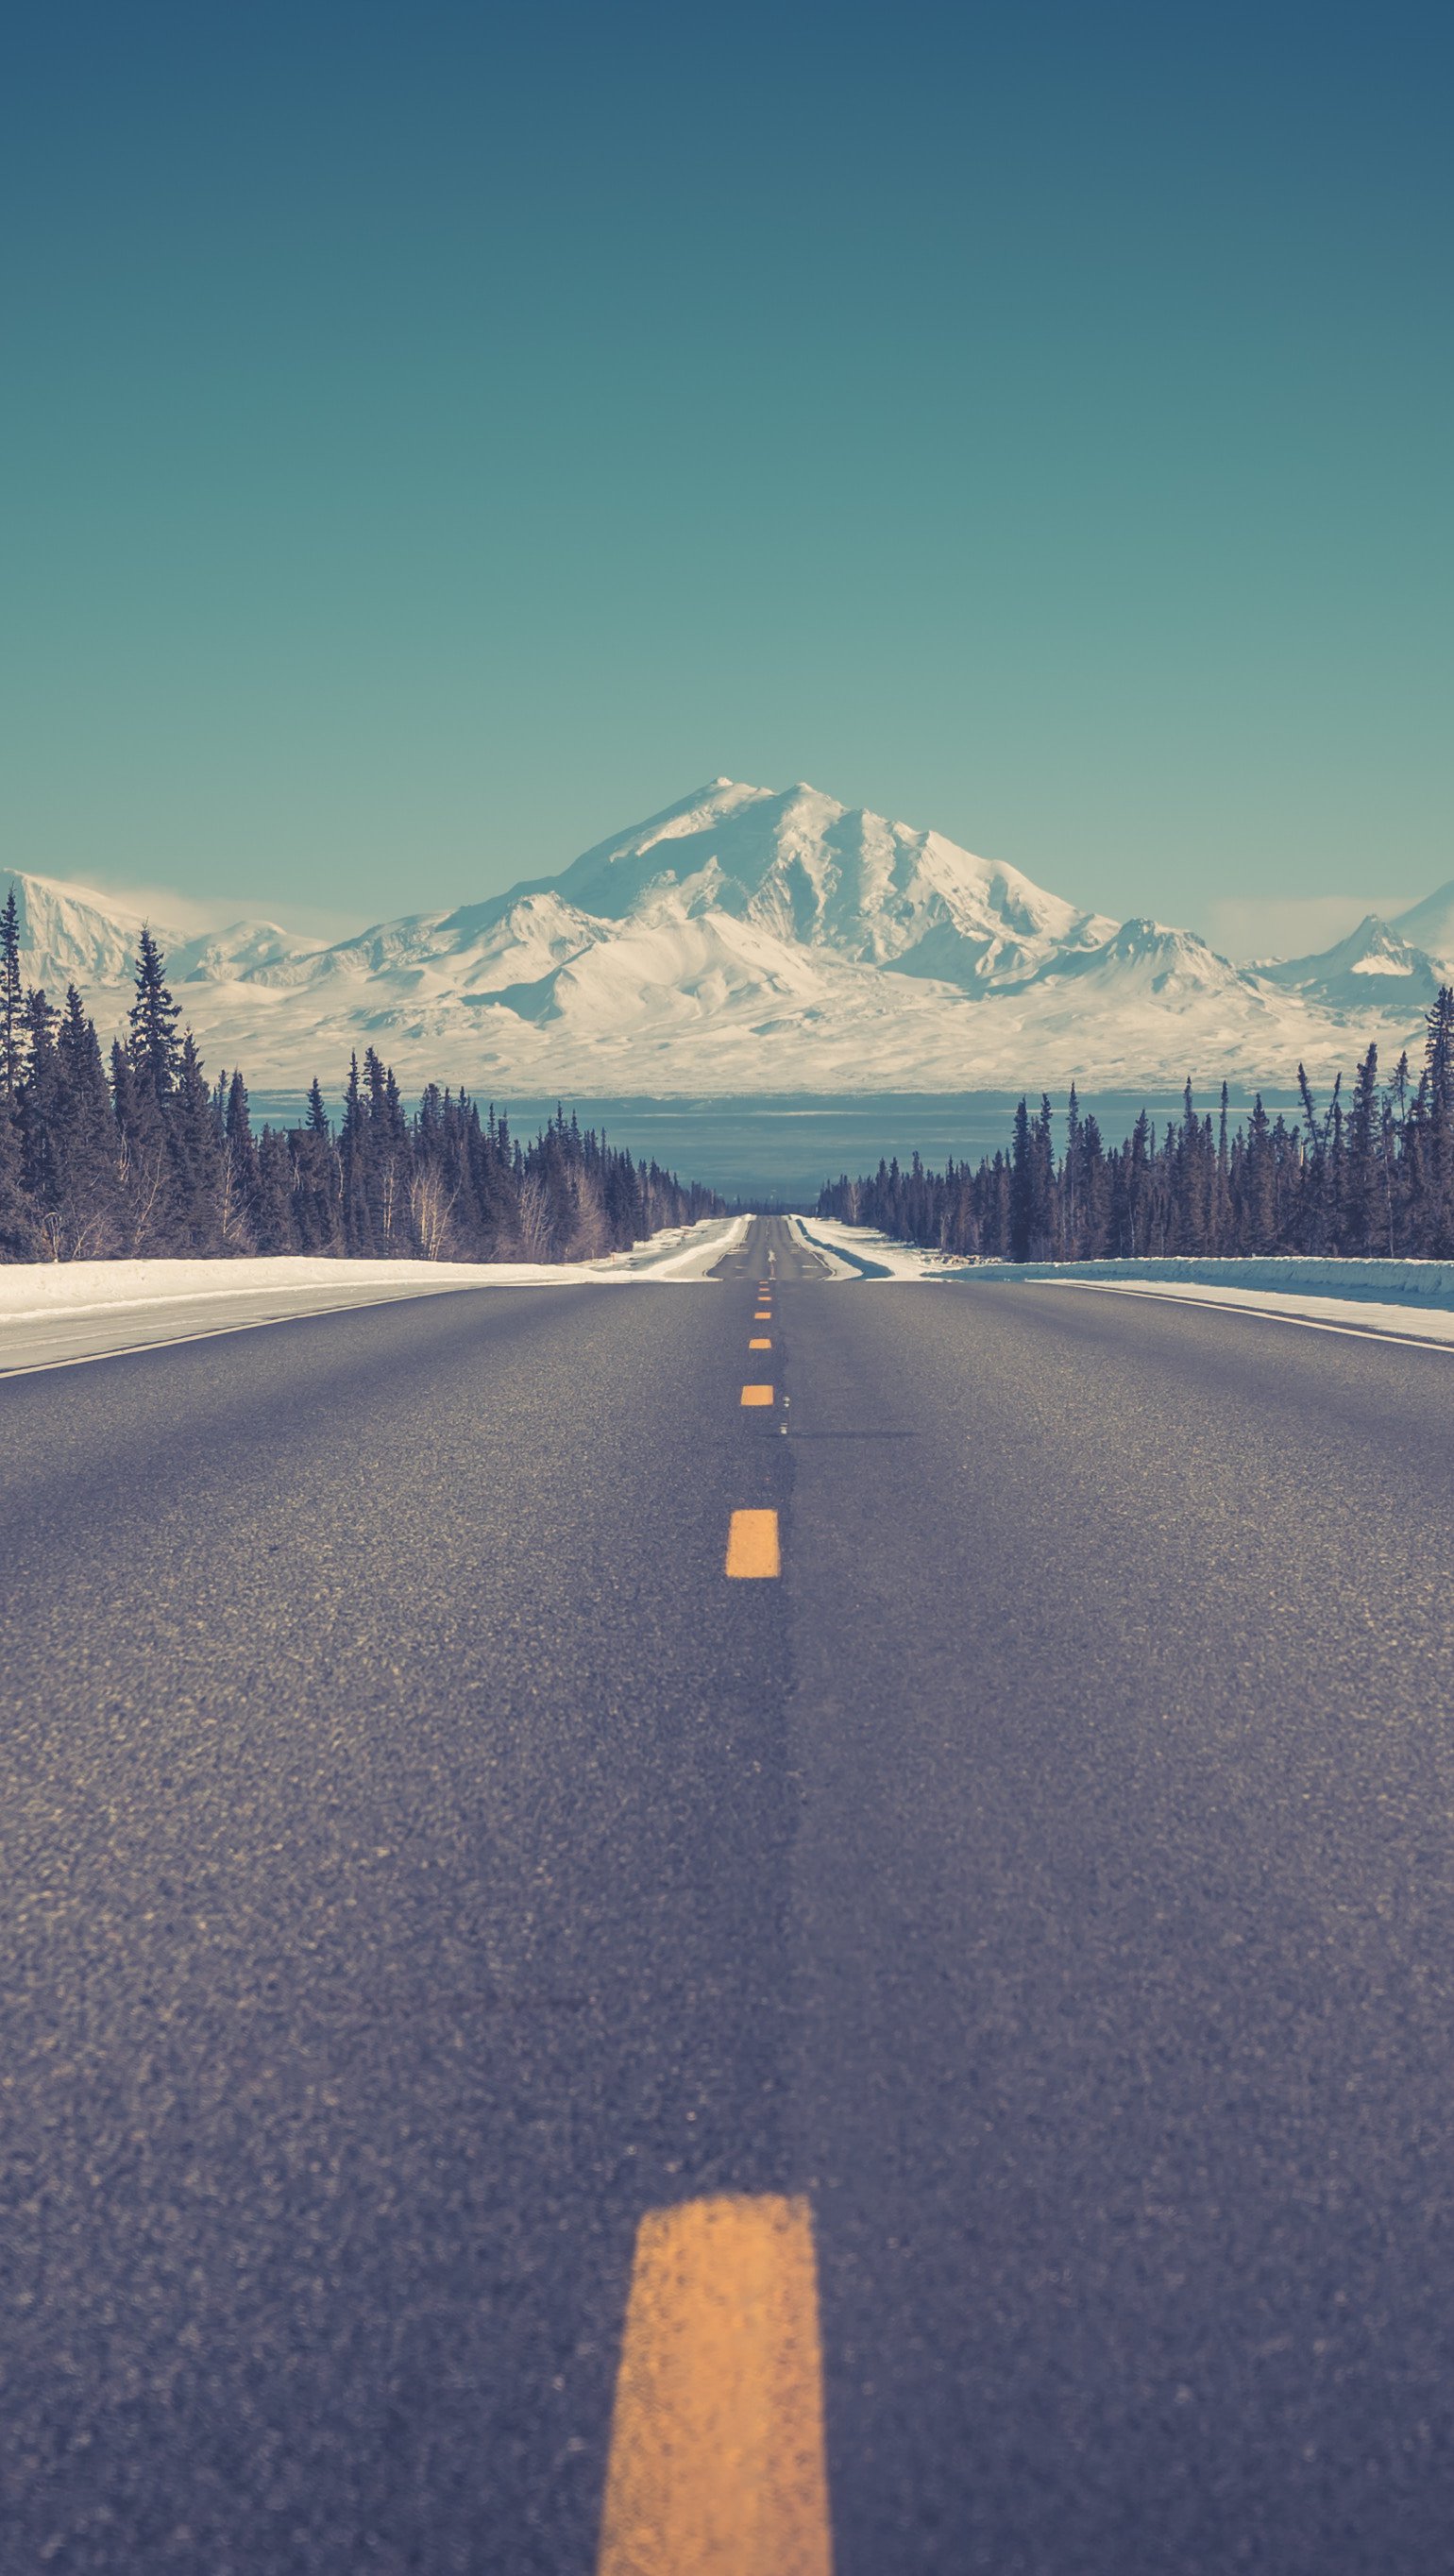 Road to mountains in winter Wallpaper